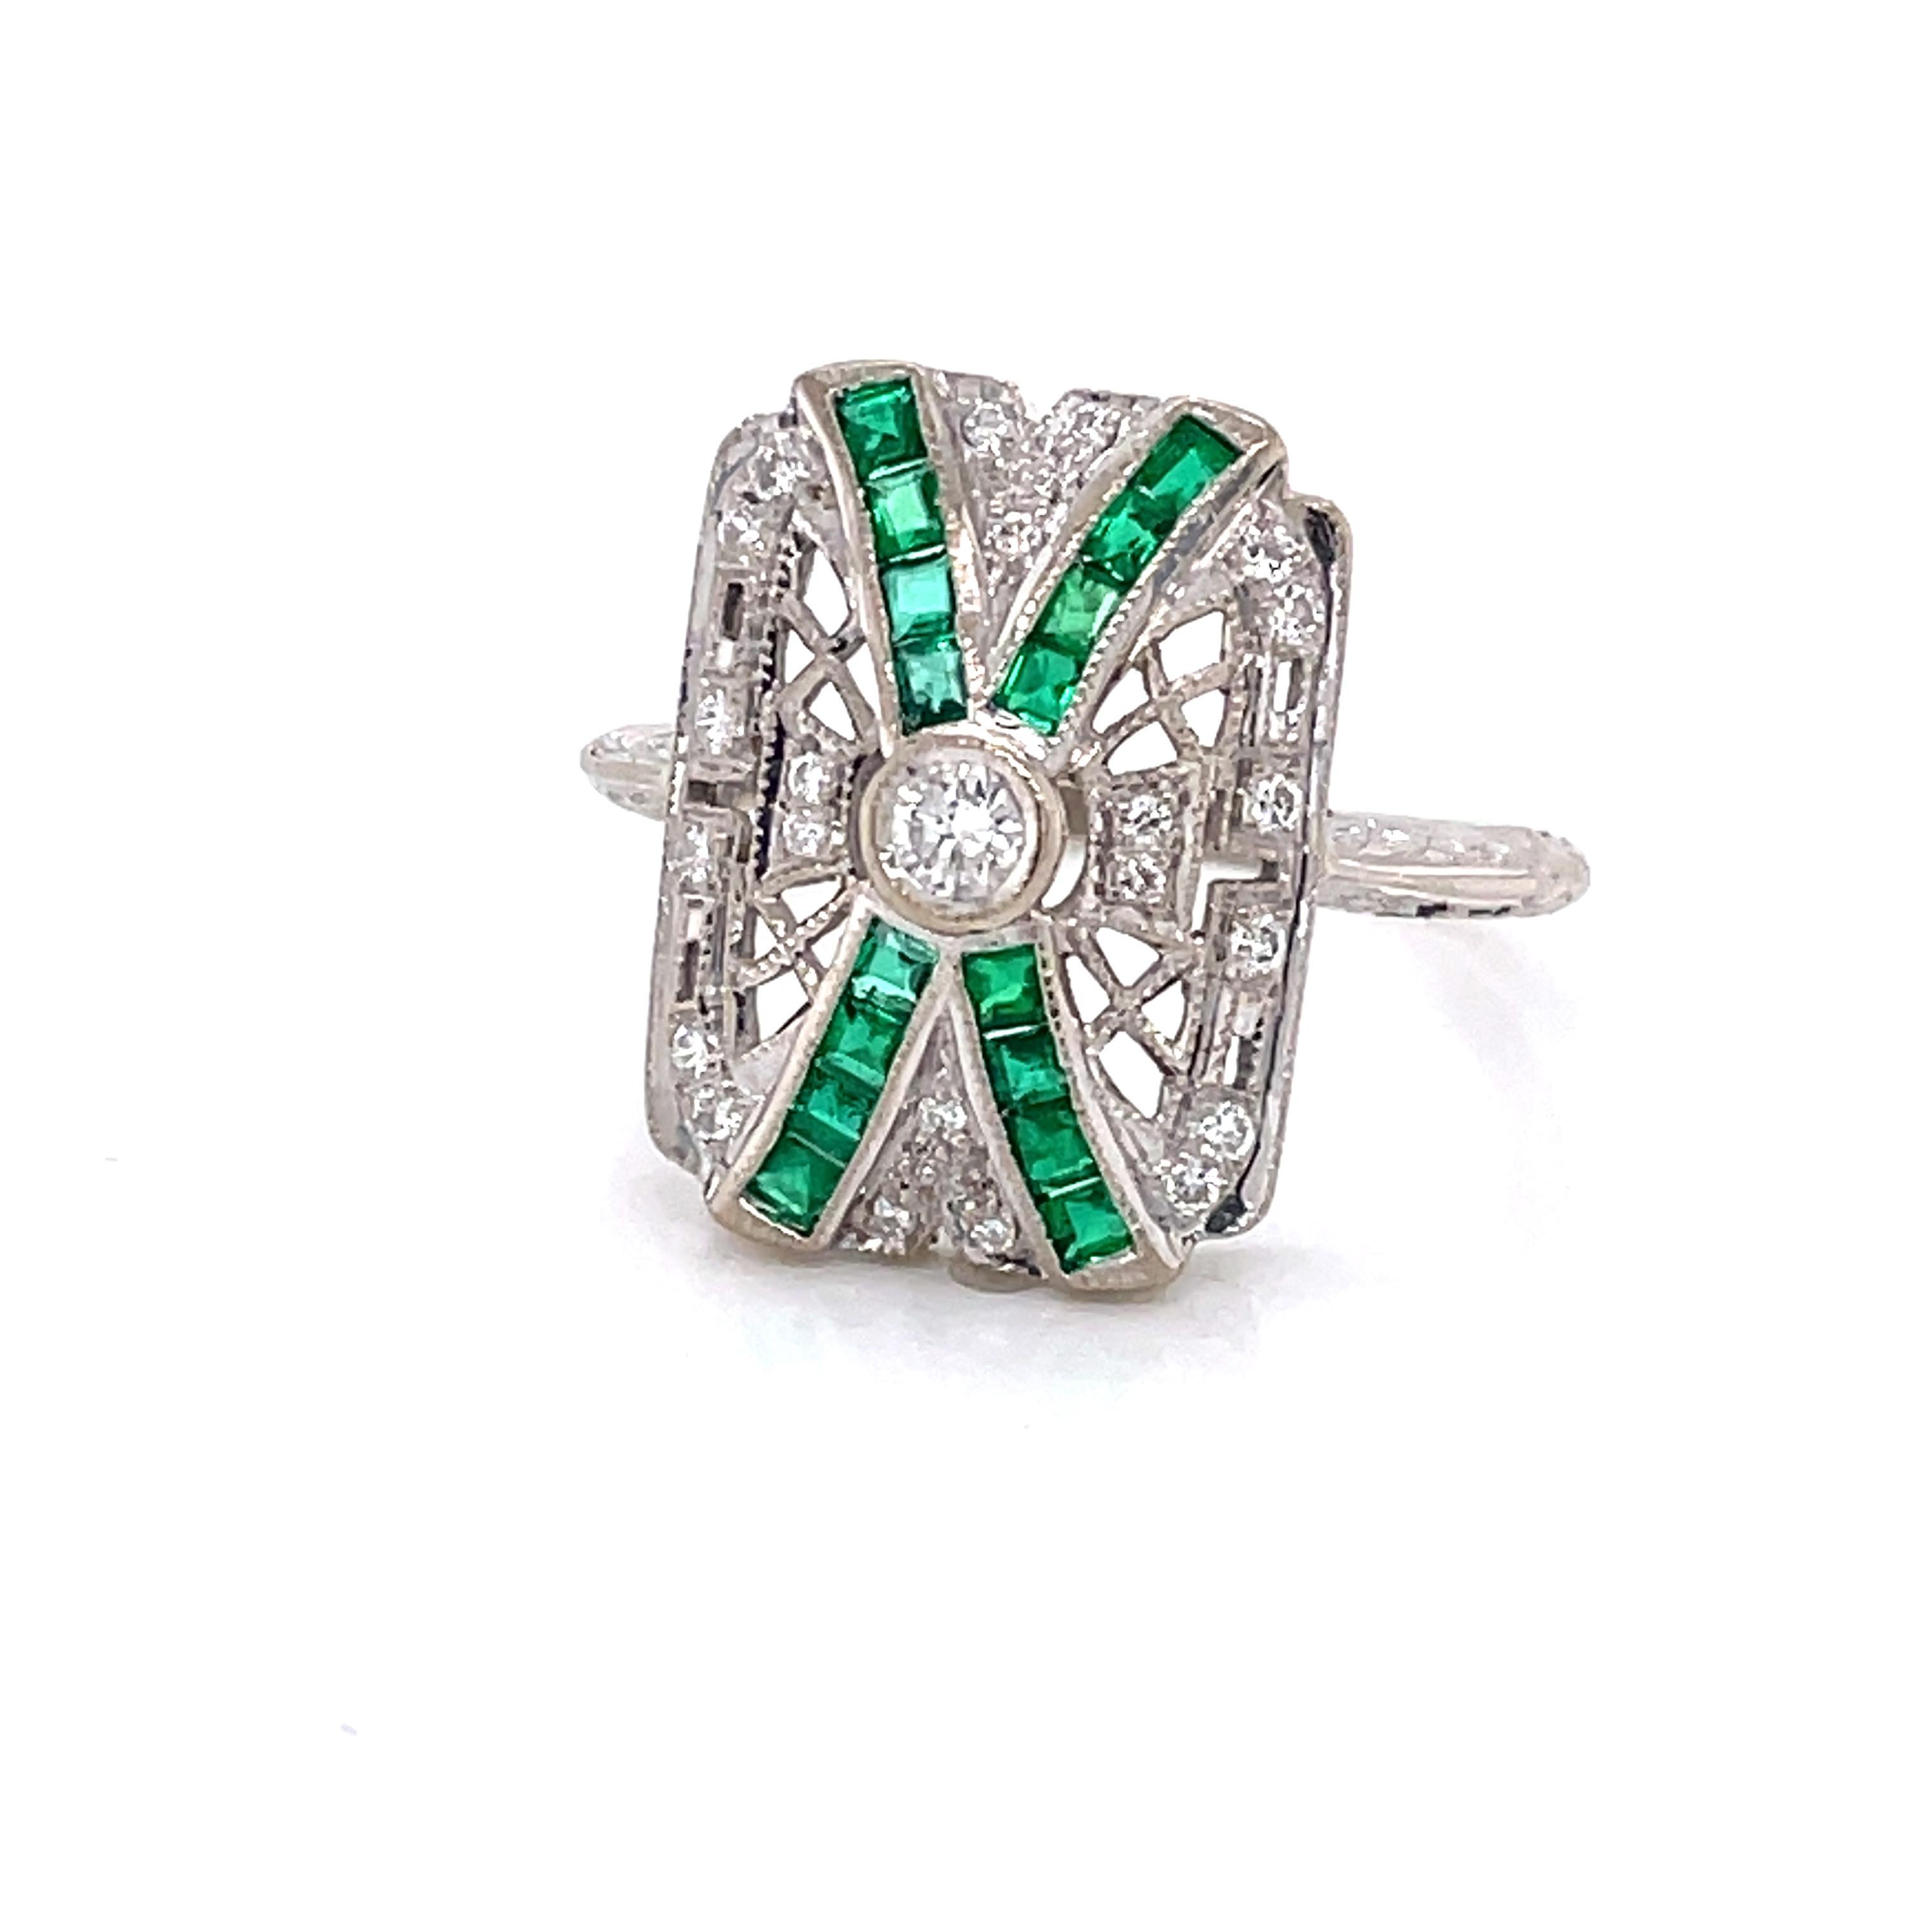 Art Deco Style Emerald Diamond 18K White Gold Ring In Excellent Condition For Sale In Mount Kisco, NY